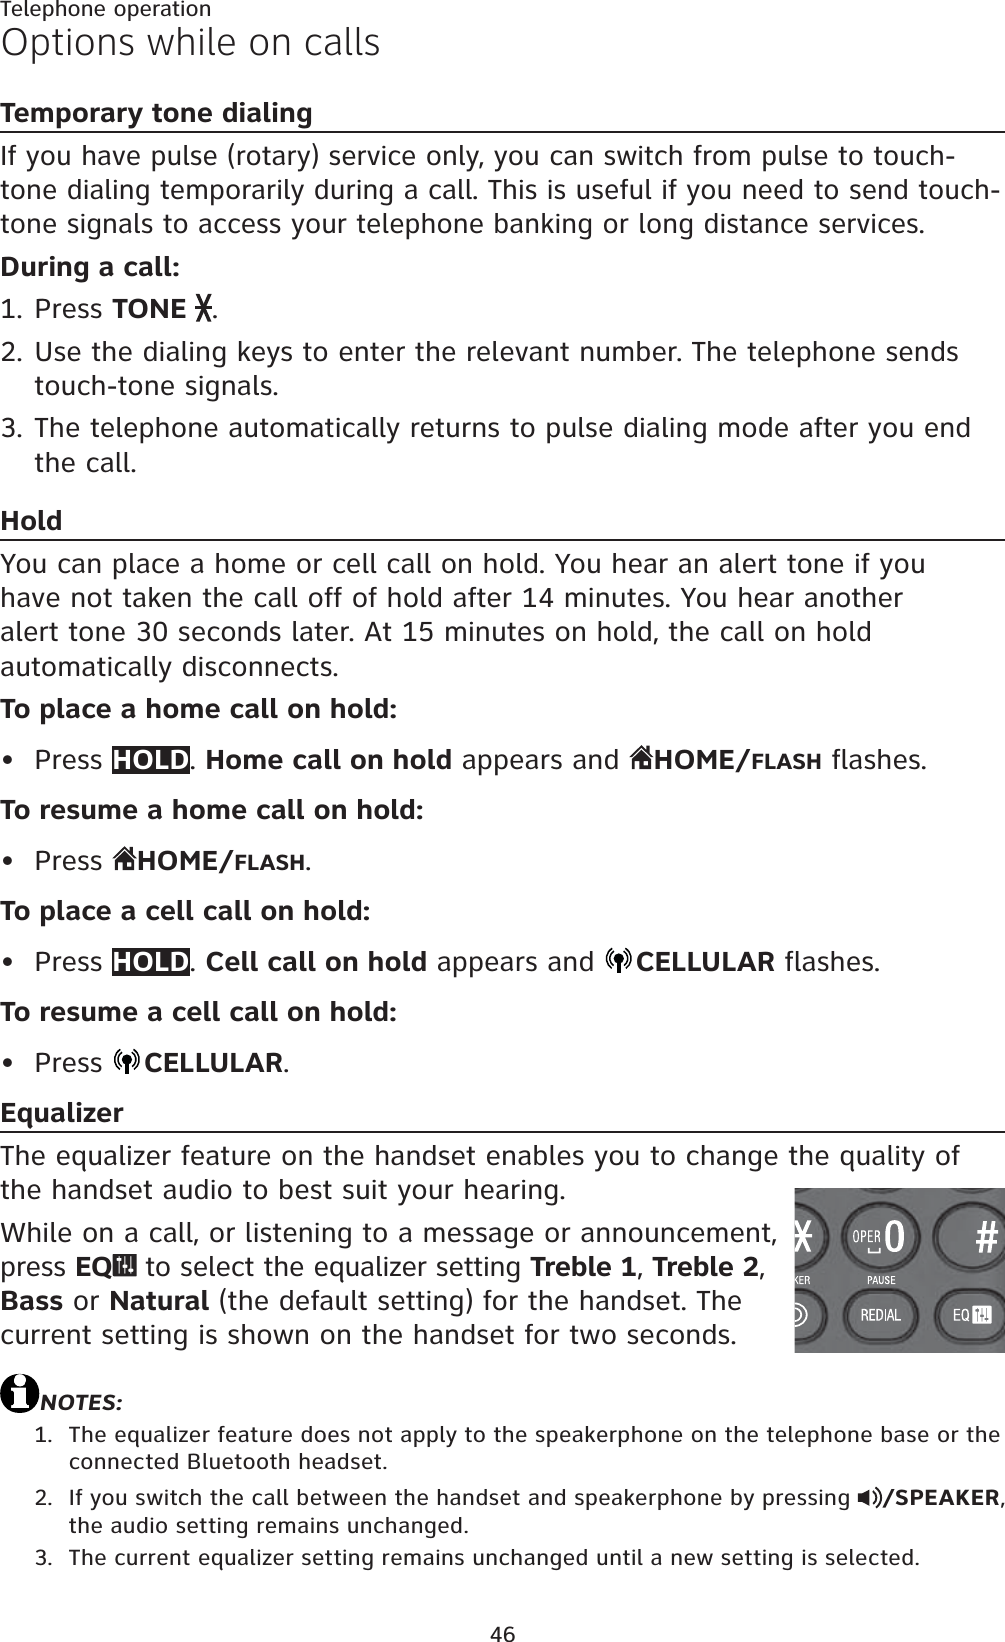 46Telephone operationOptions while on callsTemporary tone dialingIf you have pulse (rotary) service only, you can switch from pulse to touch-tone dialing temporarily during a call. This is useful if you need to send touch-tone signals to access your telephone banking or long distance services.During a call:Press TONE  .Use the dialing keys to enter the relevant number. The telephone sends touch-tone signals.The telephone automatically returns to pulse dialing mode after you end the call.HoldYou can place a home or cell call on hold. You hear an alert tone if you have not taken the call off of hold after 14 minutes. You hear another alert tone 30 seconds later. At 15 minutes on hold, the call on hold automatically disconnects.To place a home call on hold:Press HOLD.Home call on hold appears and  HOME/FLASH flashes.To resume a home call on hold:Press  HOME/FLASH.To place a cell call on hold:Press HOLD.Cell call on hold appears and  CELLULAR flashes.To resume a cell call on hold:Press  CELLULAR.EqualizerThe equalizer feature on the handset enables you to change the quality of the handset audio to best suit your hearing.While on a call, or listening to a message or announcement, press EQ  to select the equalizer setting Treble 1, Treble 2,Bass or Natural (the default setting) for the handset. The current setting is shown on the handset for two seconds.NOTES:The equalizer feature does not apply to the speakerphone on the telephone base or the connected Bluetooth headset.If you switch the call between the handset and speakerphone by pressing  /SPEAKER,the audio setting remains unchanged.The current equalizer setting remains unchanged until a new setting is selected.1.2.3.••••1.2.3.